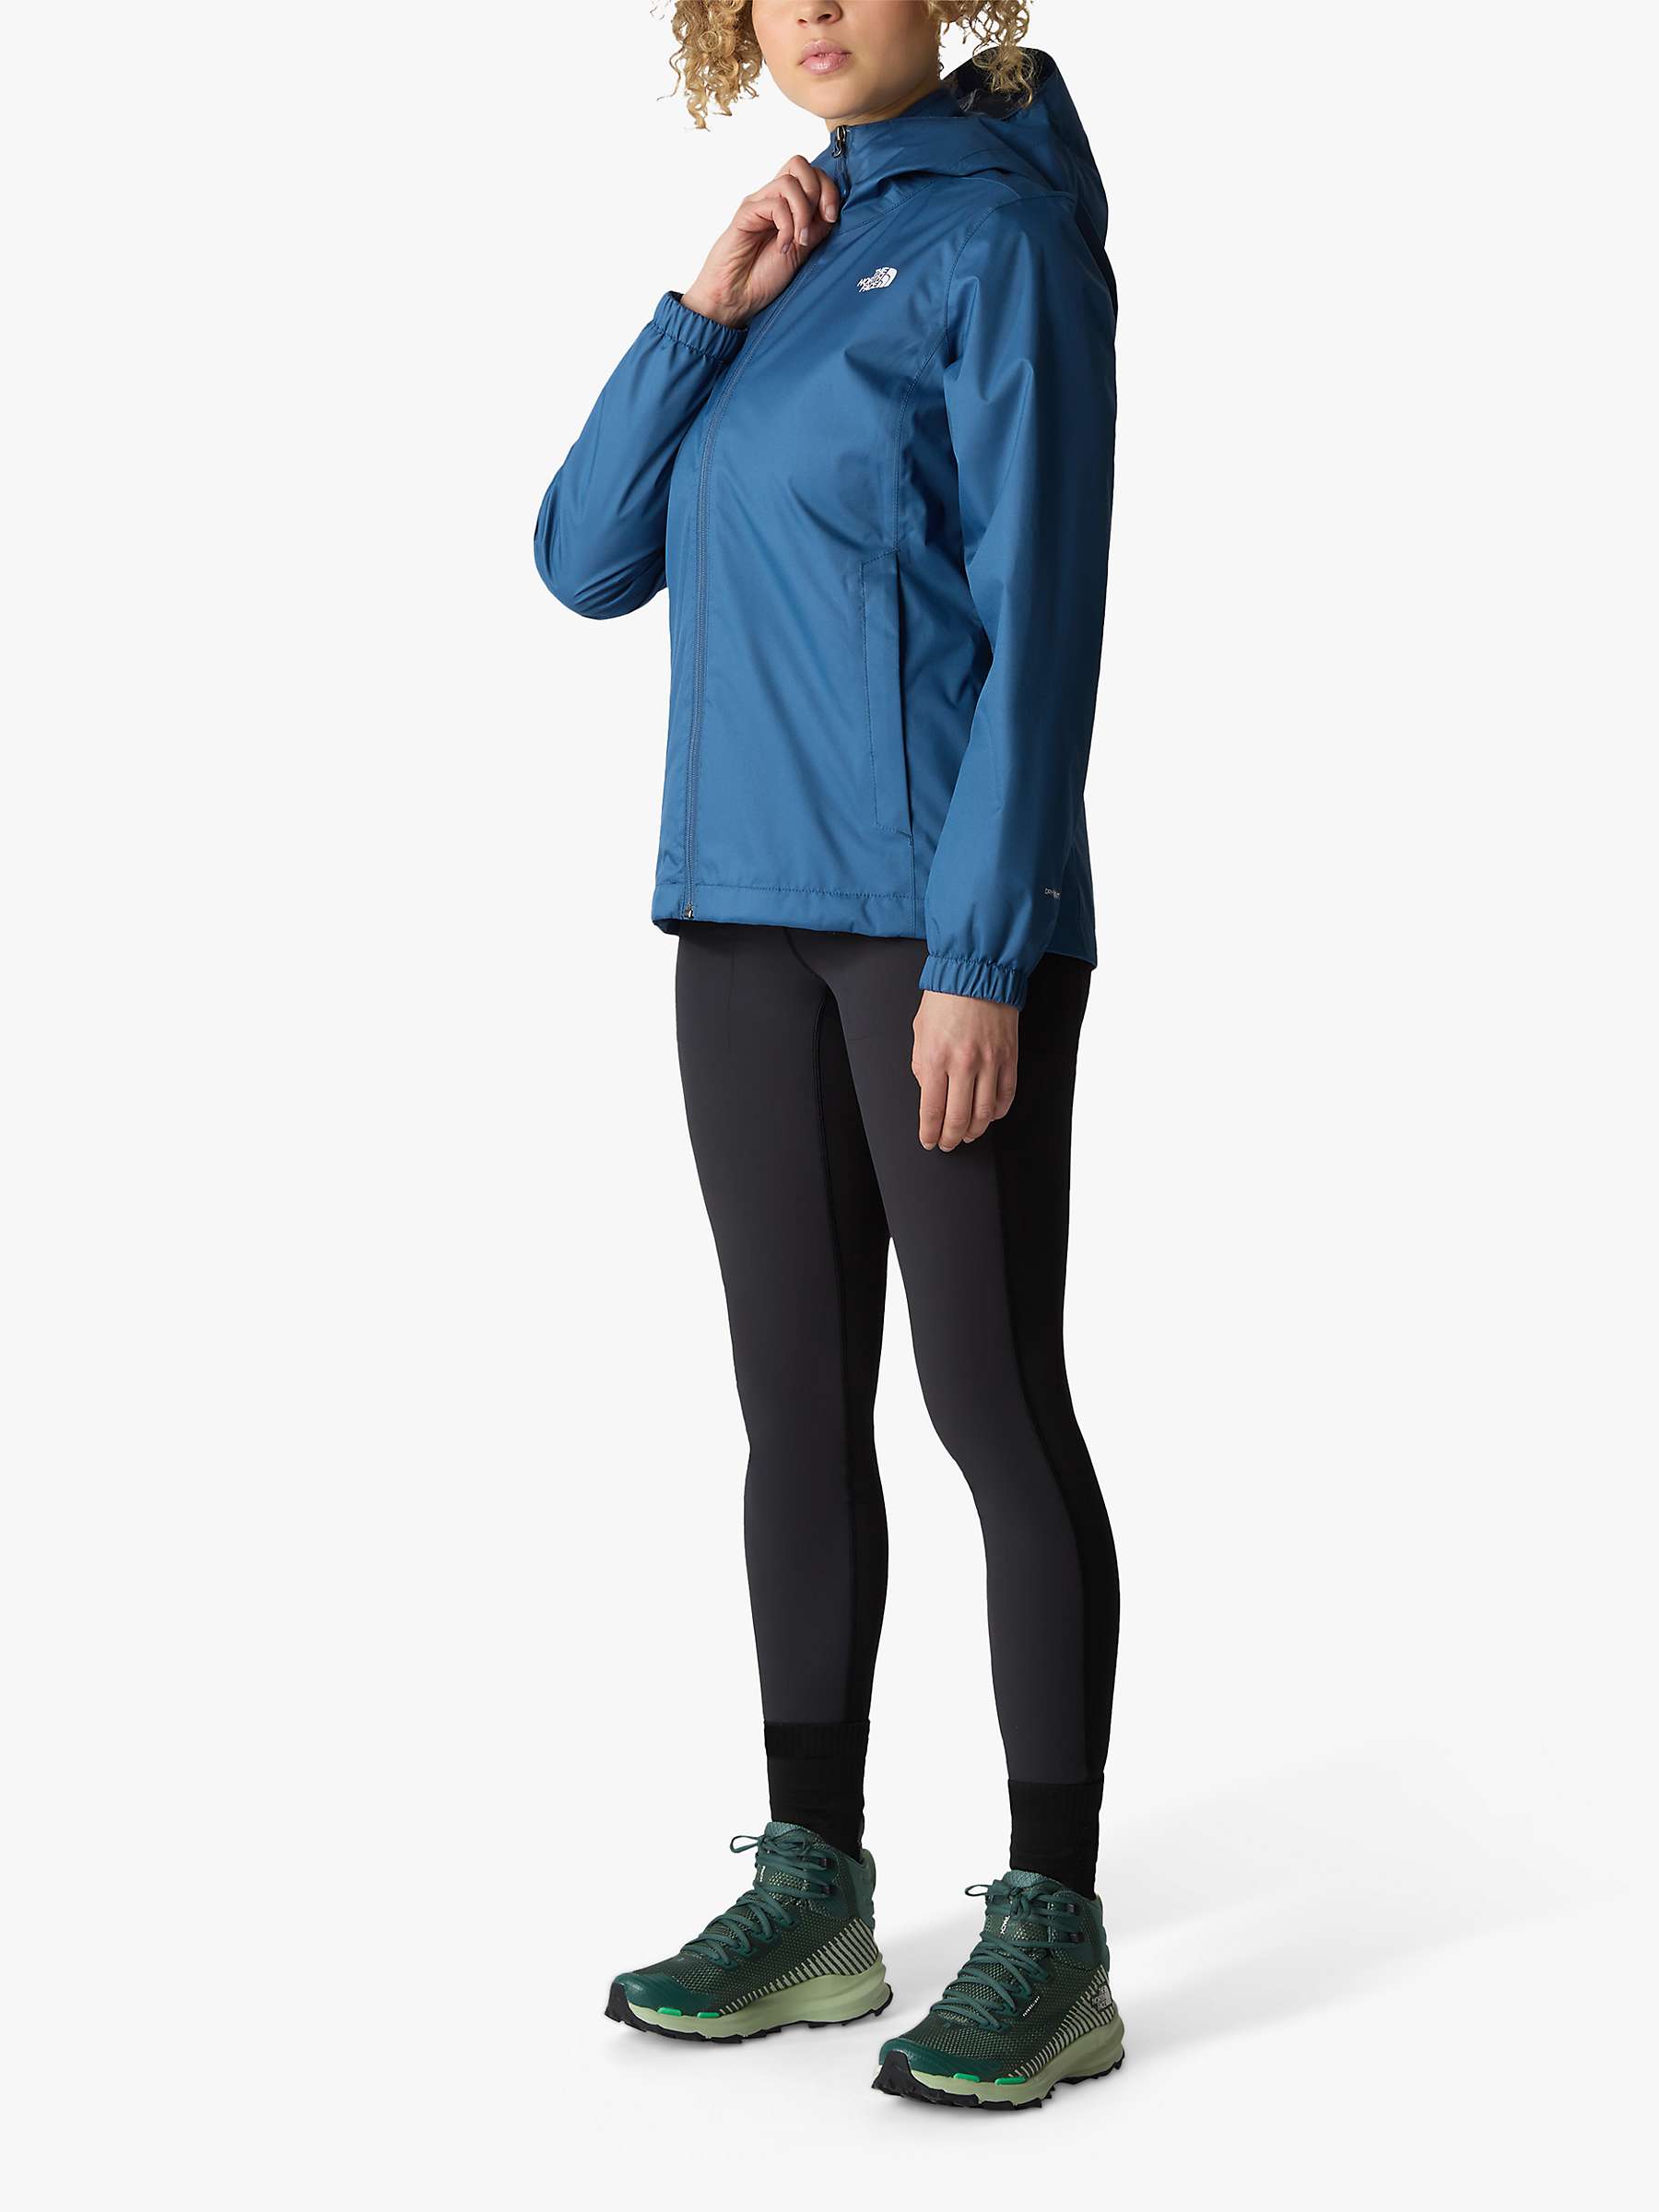 Buy The North Face Women's Quest Hooded Jacket Online at johnlewis.com